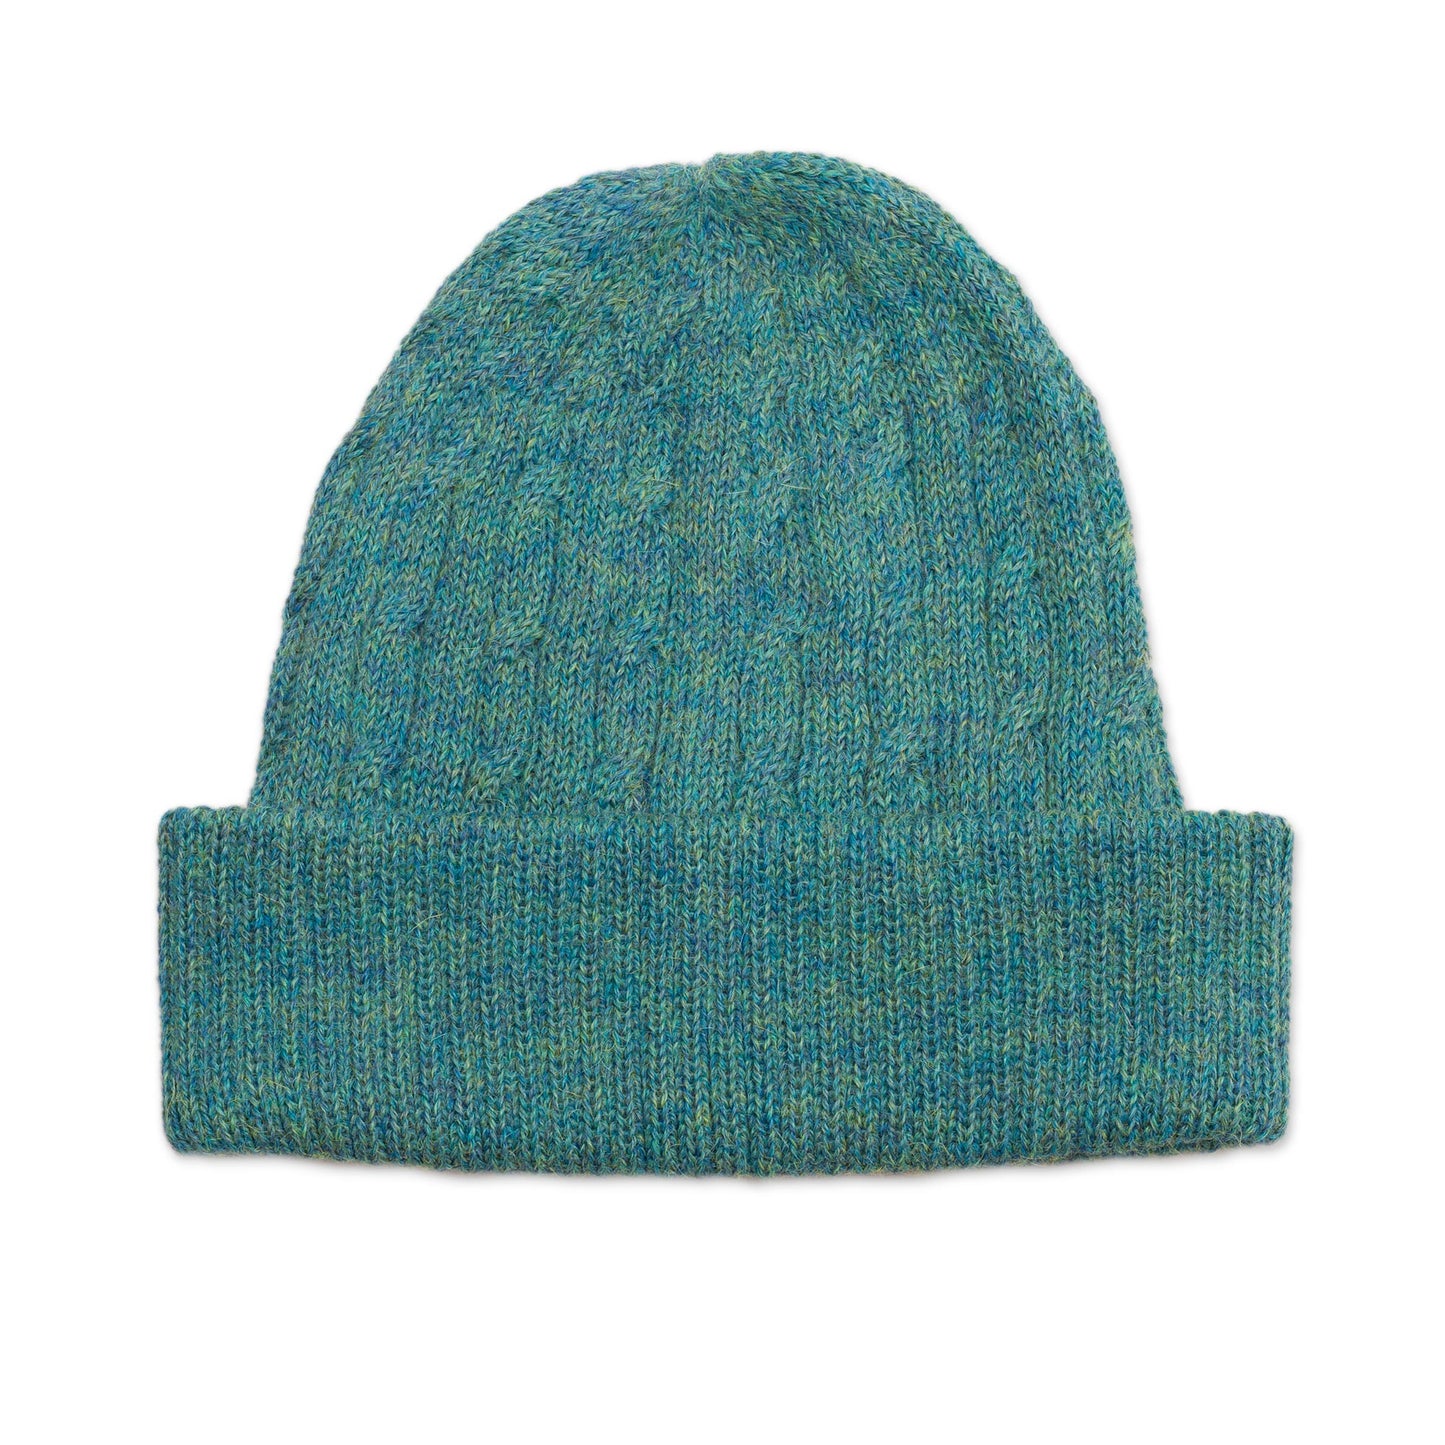 Comfy in Teal Teal 100% Alpaca Cable Pattern Soft Knit Hat From Peru